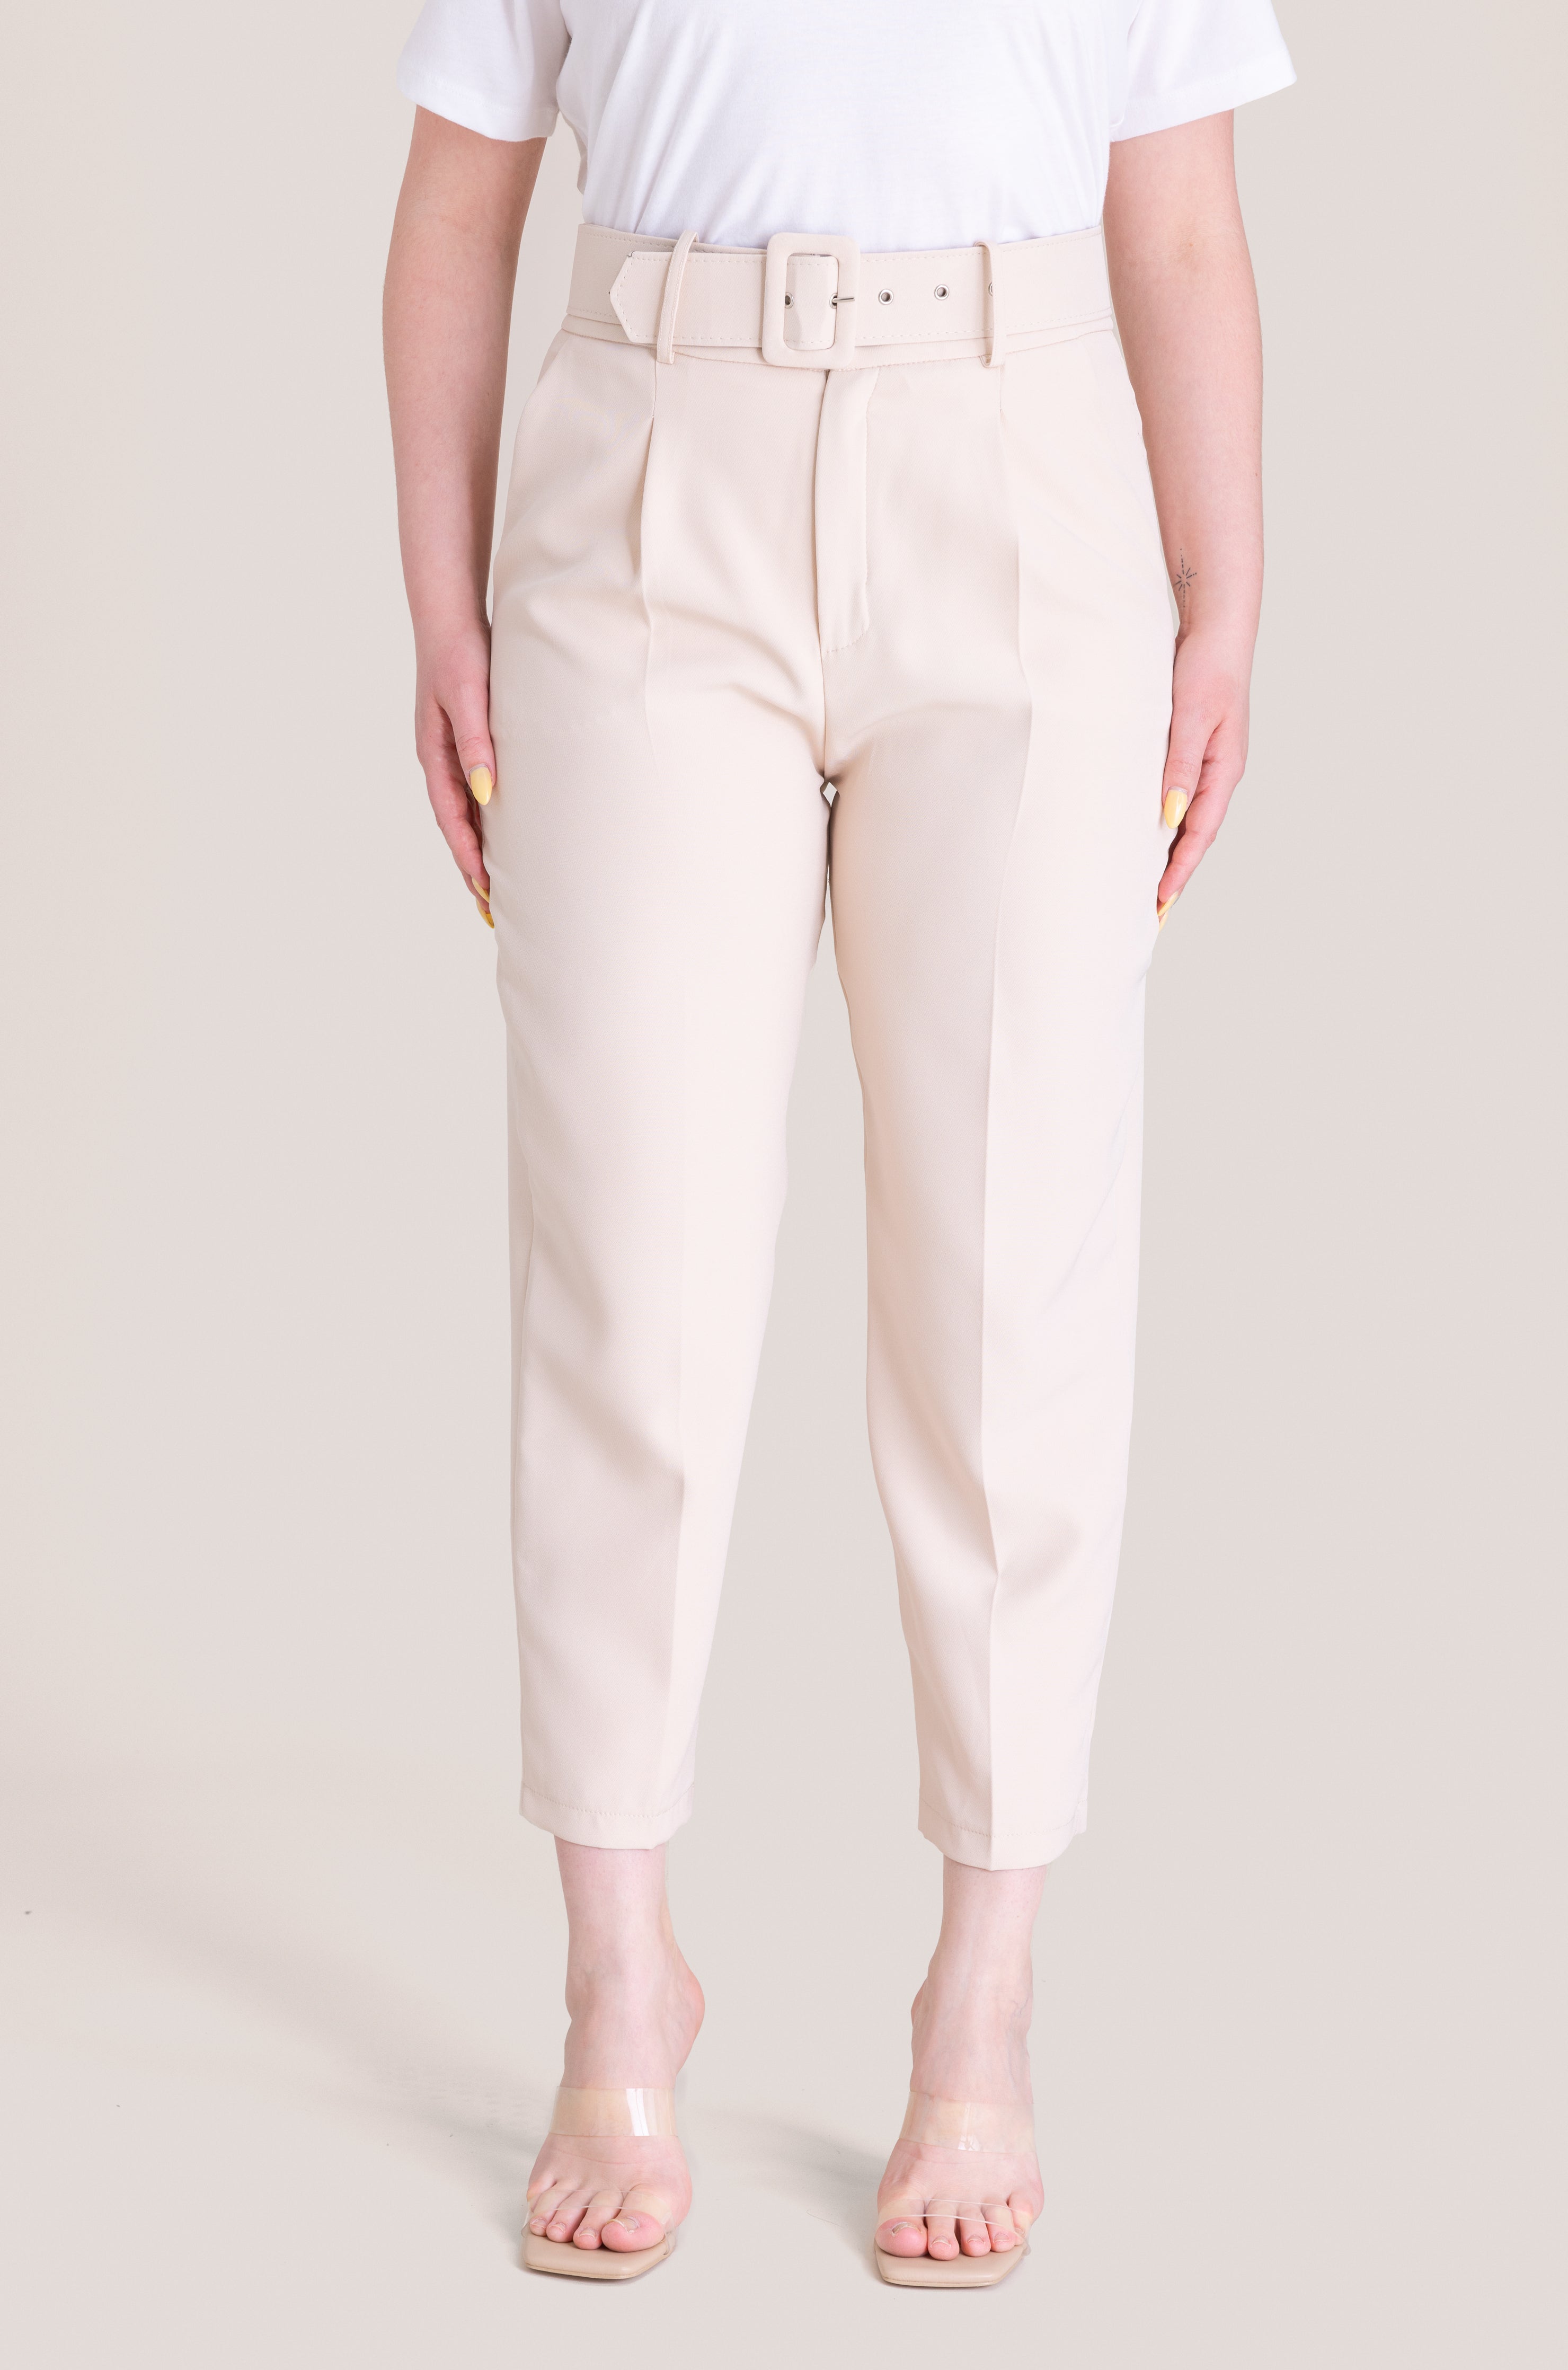 High-Waist Belted Casual Pant - Cream White